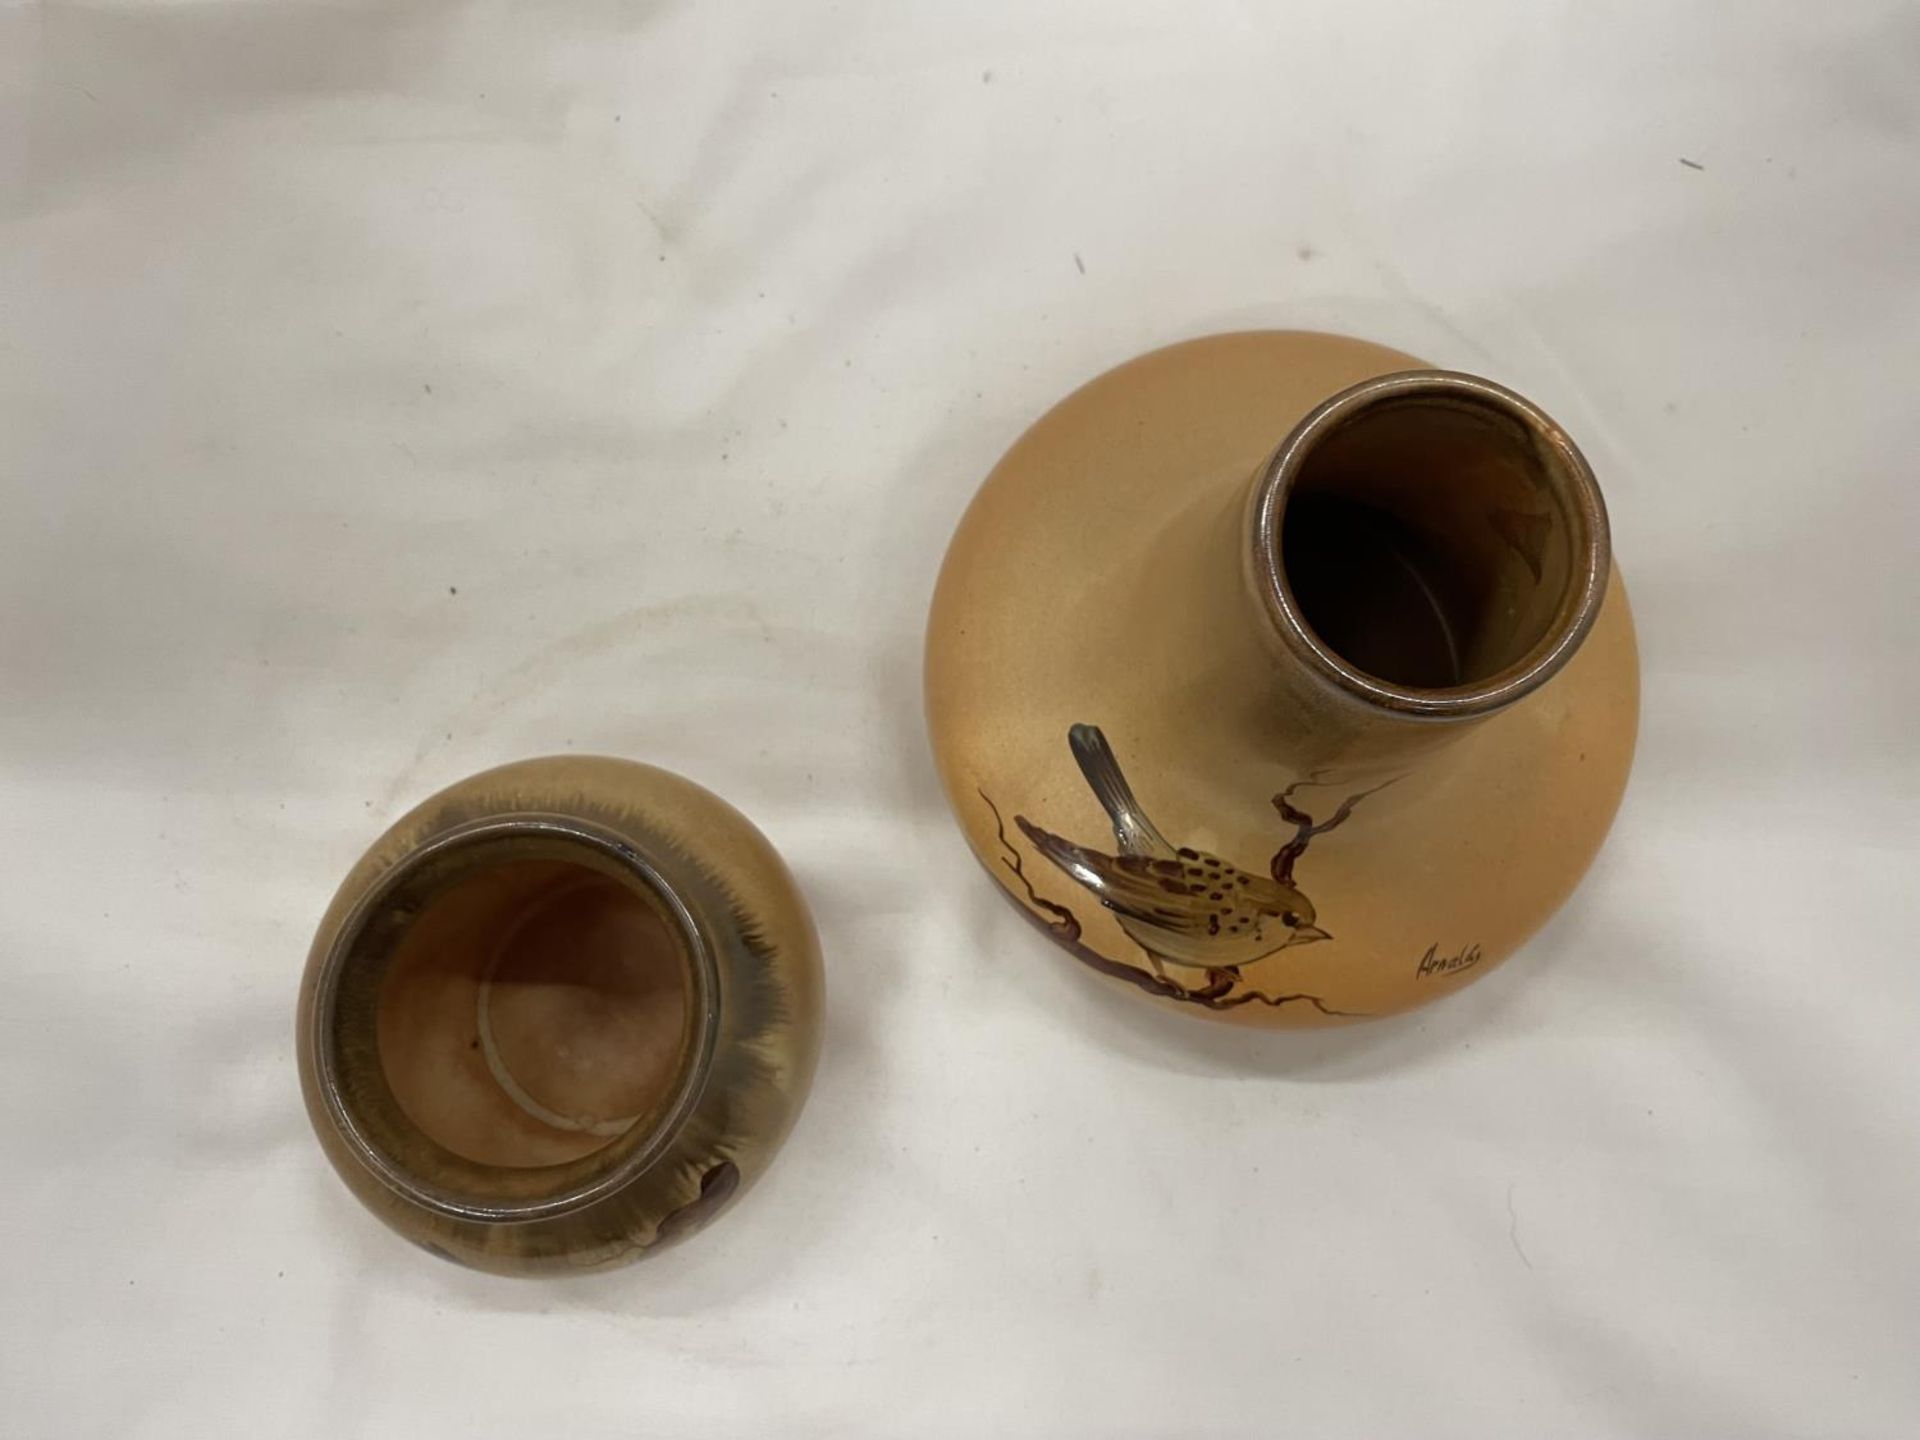 TWO STUDIO POTTERY VASES DECORATED WITH SPARROWS, SIGNED. HEIGHT 14CM AND 8CM - Image 3 of 4